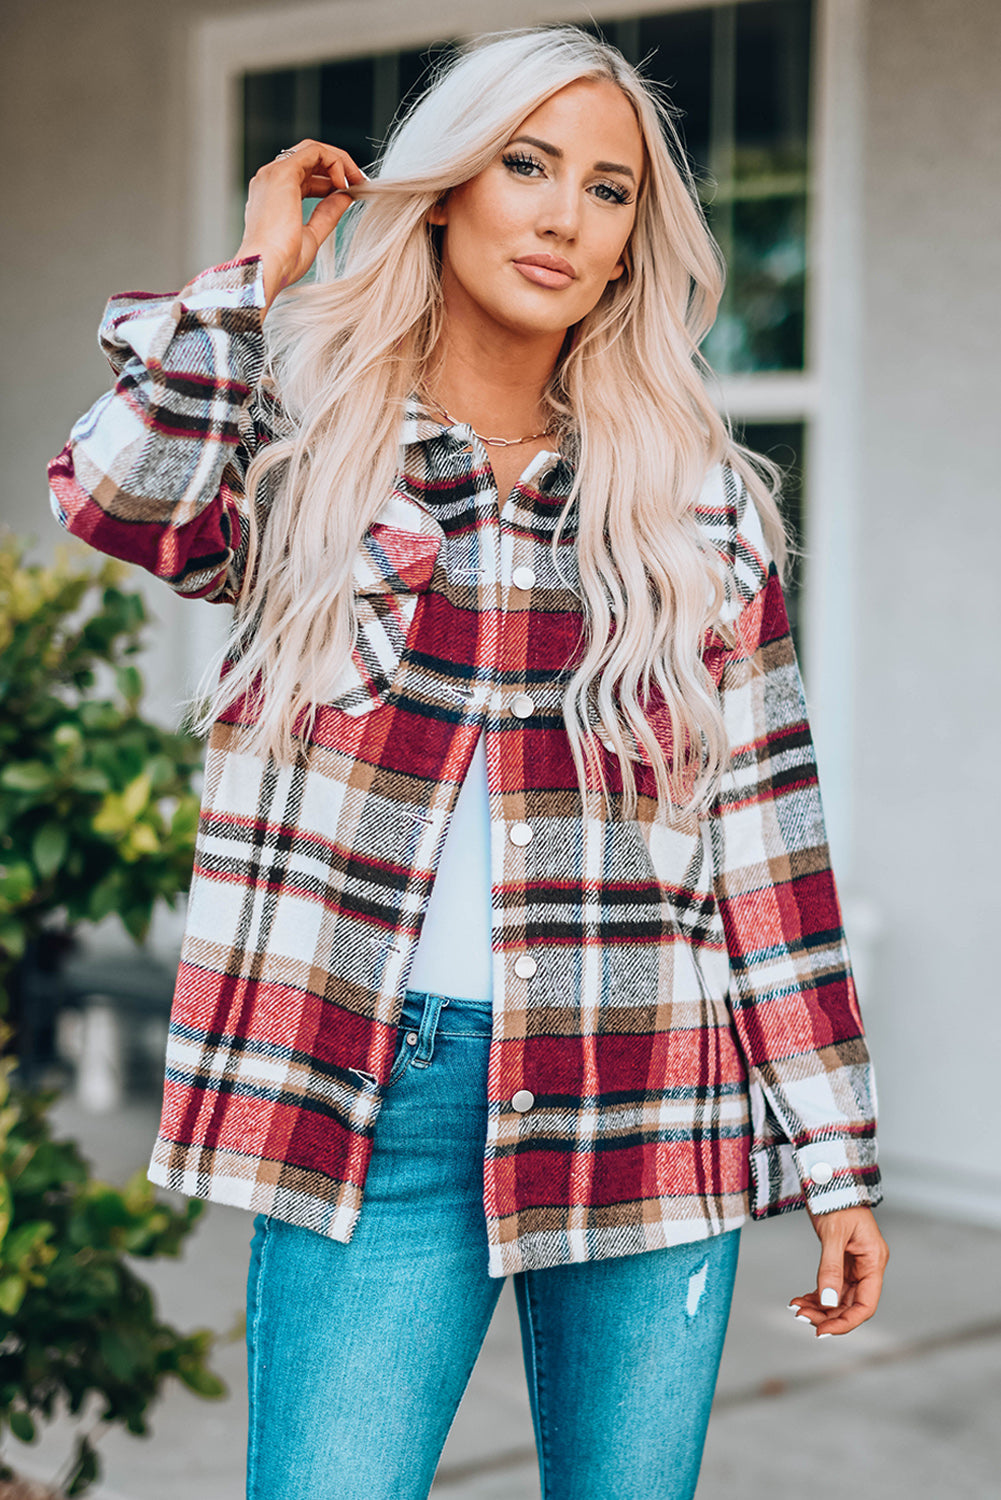 Plaid Button Front Shirt Jacket with Breast Pockets Print on any thing USA/STOD clothes